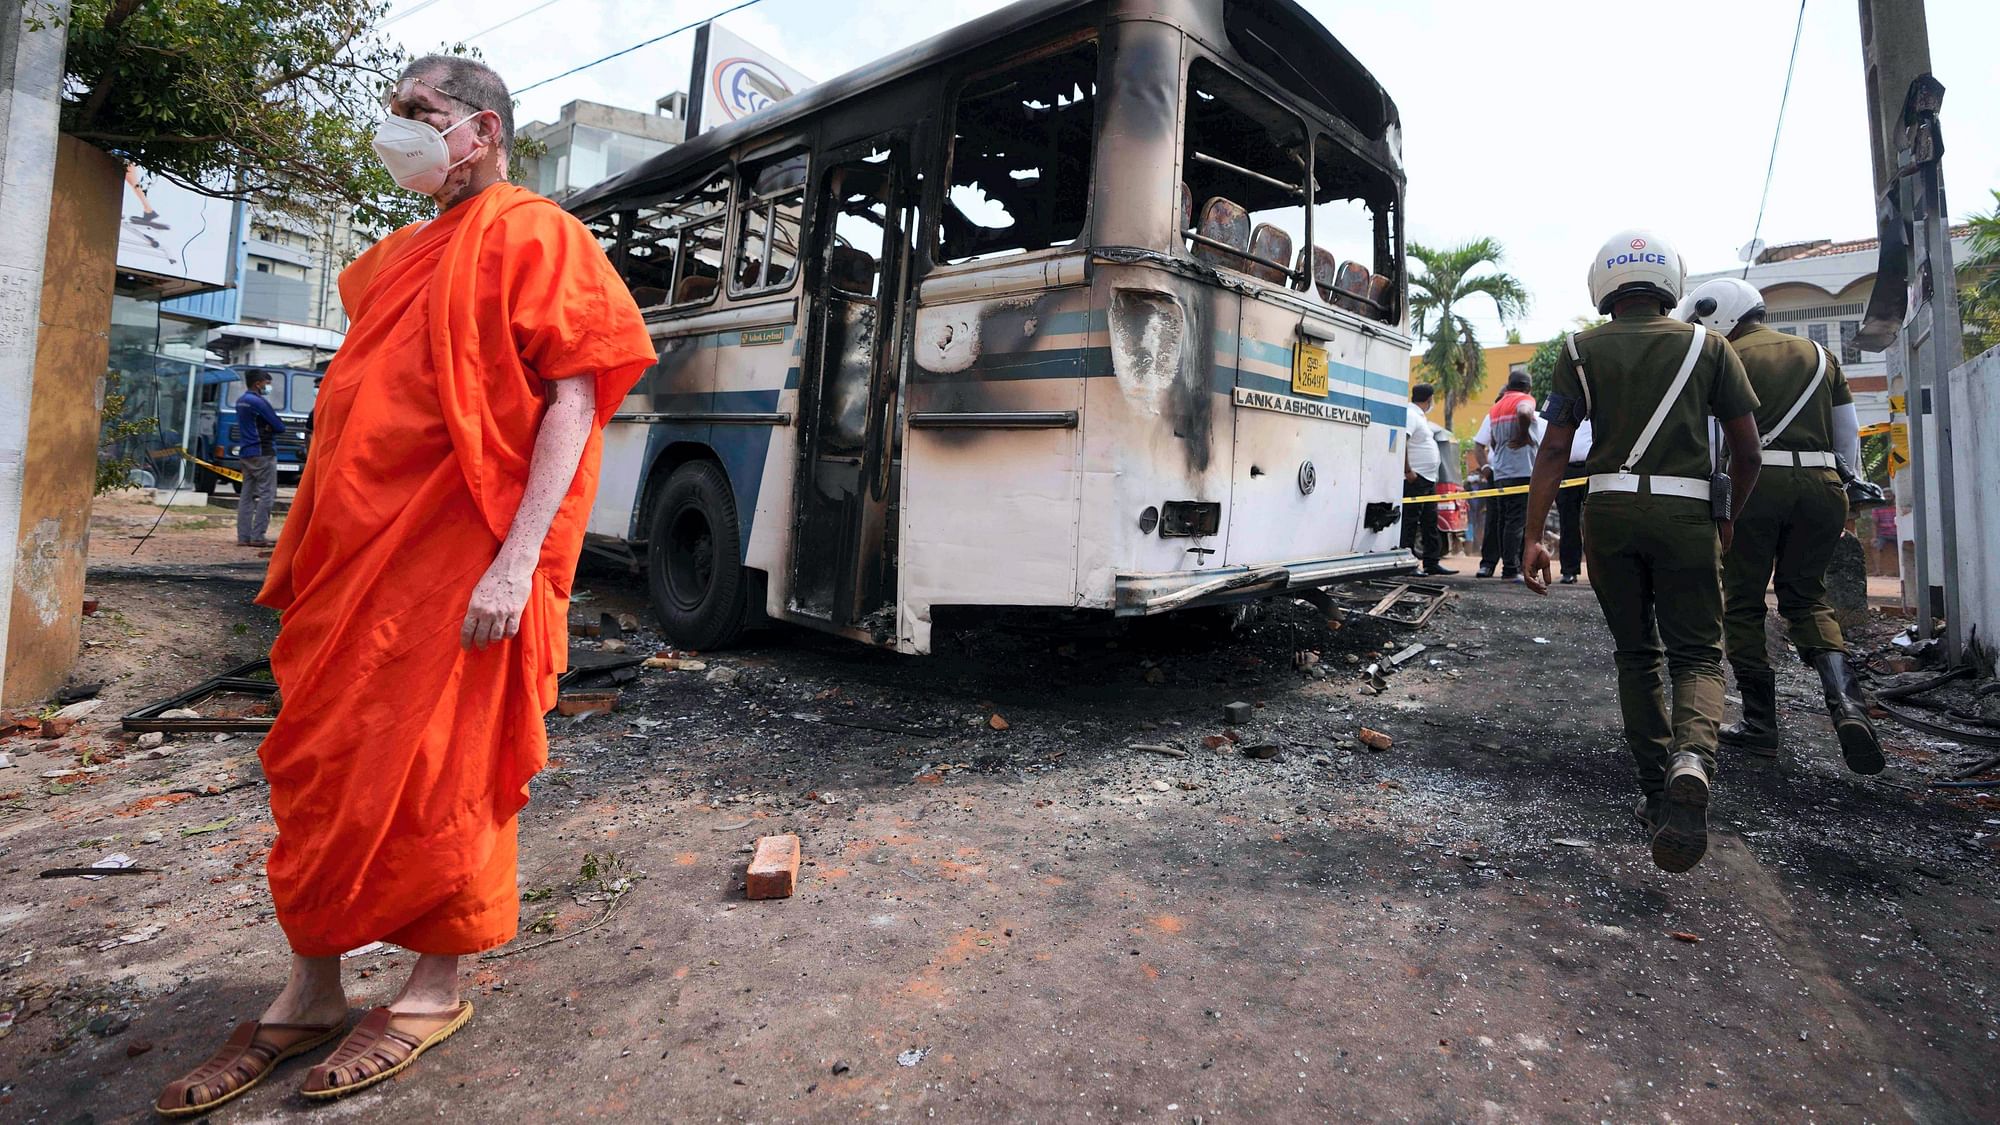 <div class="paragraphs"><p>A Sri Lankan Buddhist monk, supporter of president Gotabaya Rajapaksa, inspects debris created by overnight clashes between protesters and police near the Sri Lankan Presidents private residence on the outskirts of Colombo, Sri Lanka, Friday, April 1, 2022. </p></div>